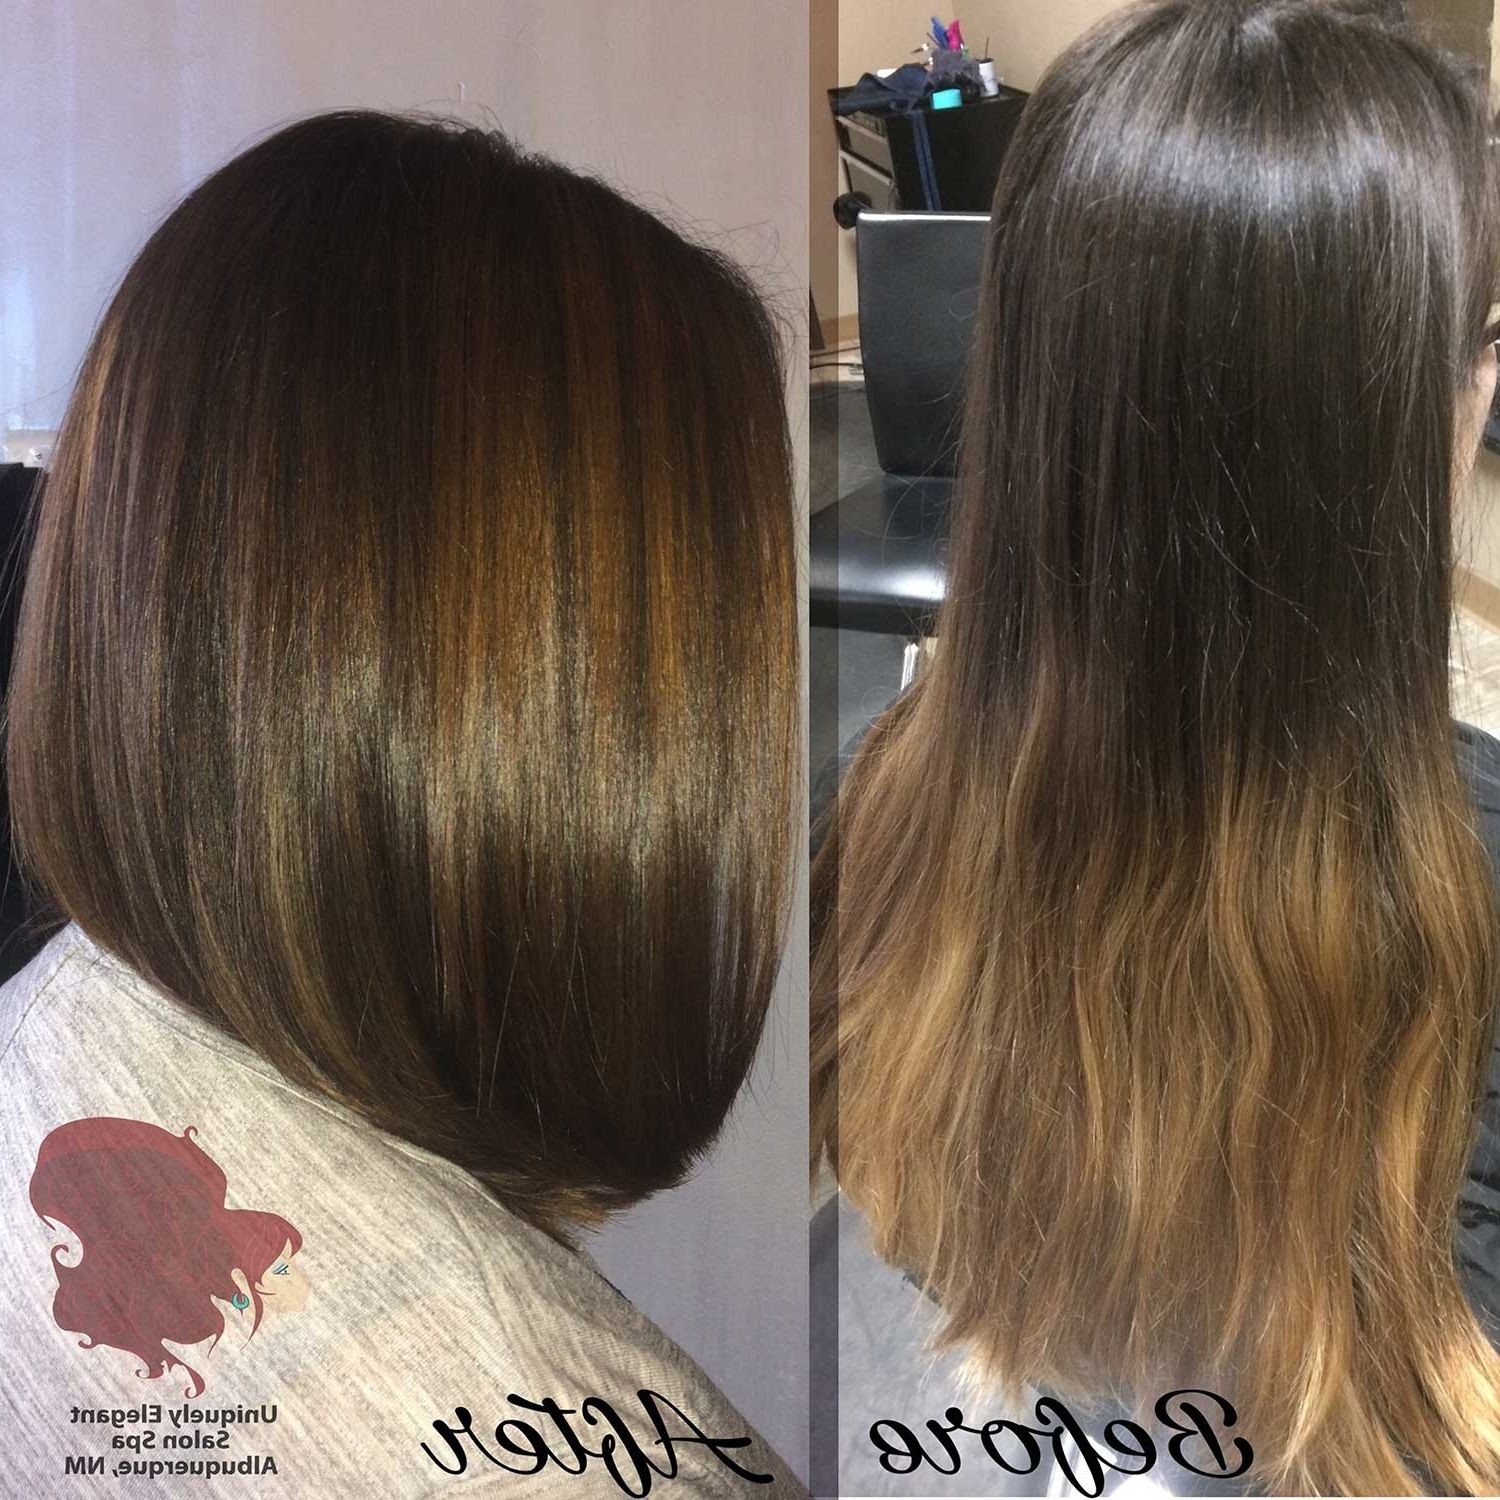 Images Tagged "long Hair To Short Hair Abq" | Uniquely Elegant Salon Spa Intended For Most Current Shaggy Pixie Haircuts With Balayage Highlights (View 13 of 15)